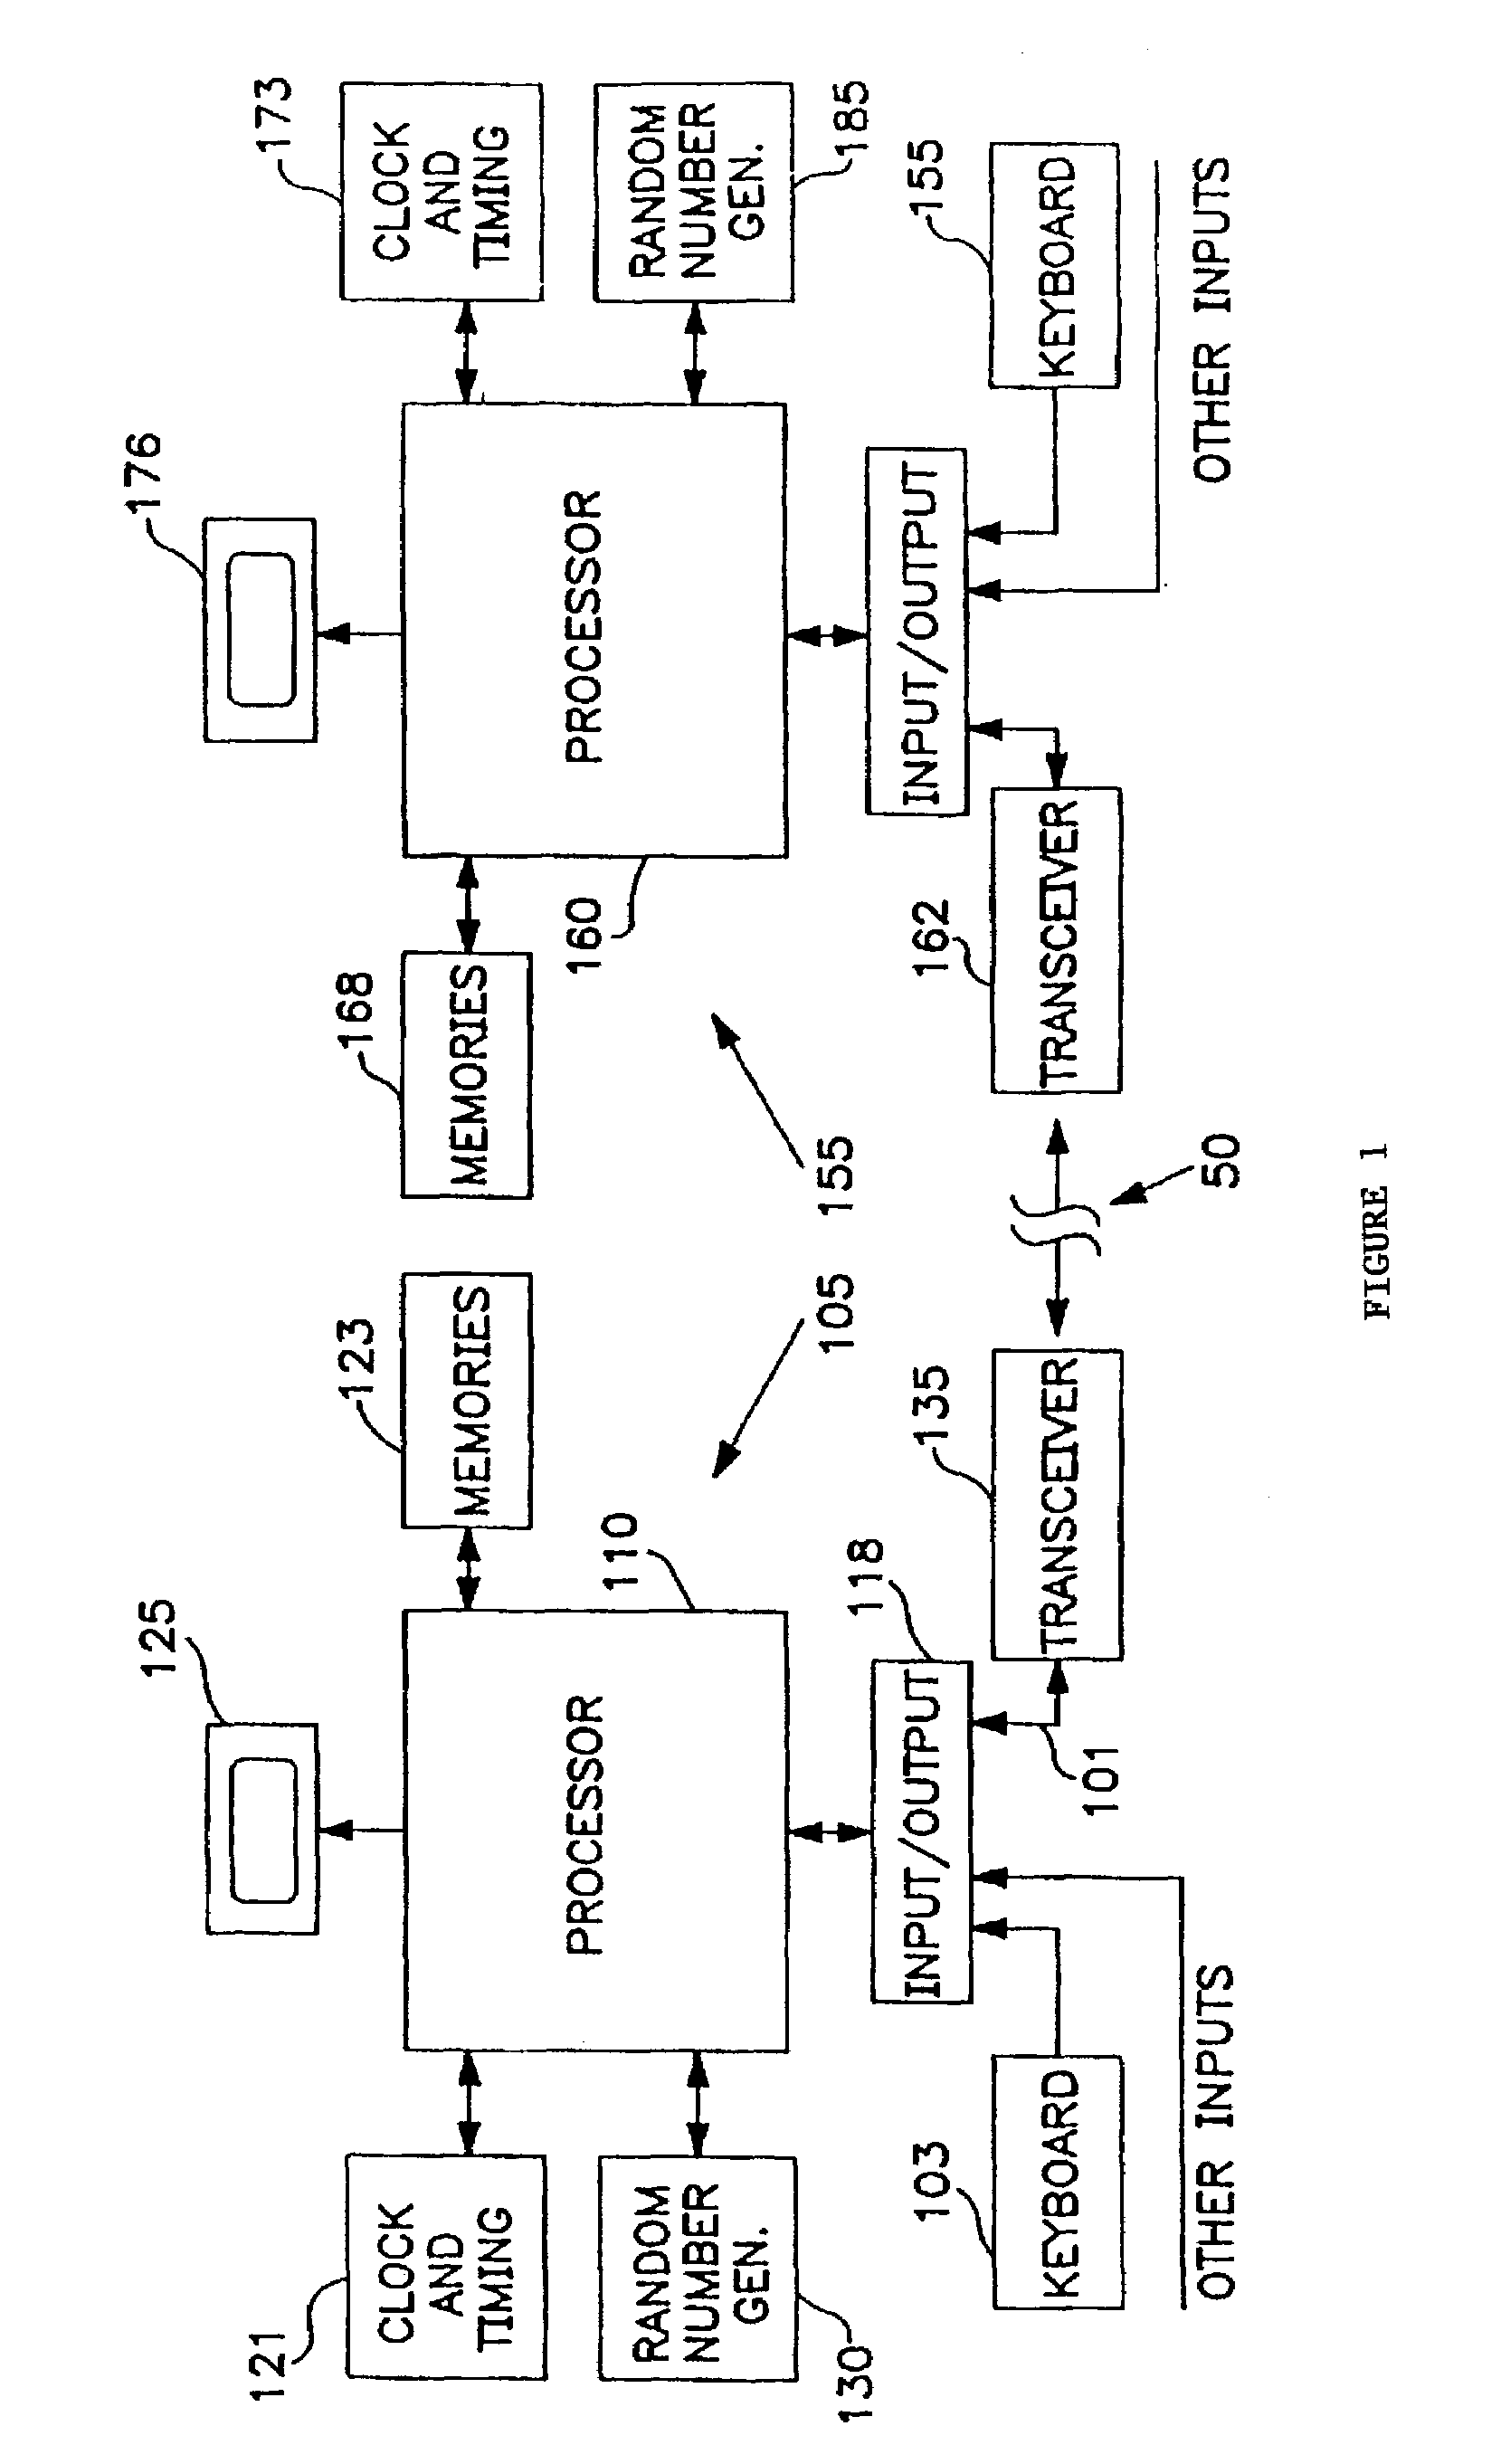 Digital signature and authentication method and apparatus